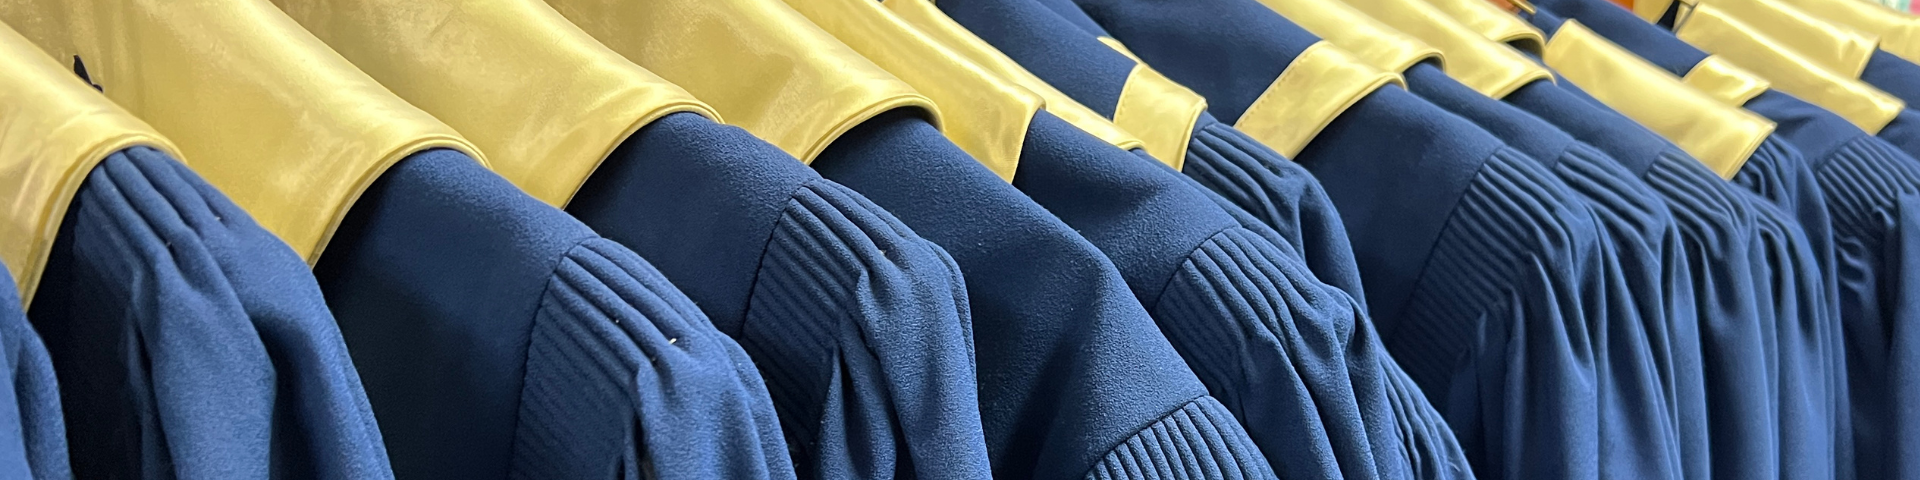 Blue choir robes hanging in a row